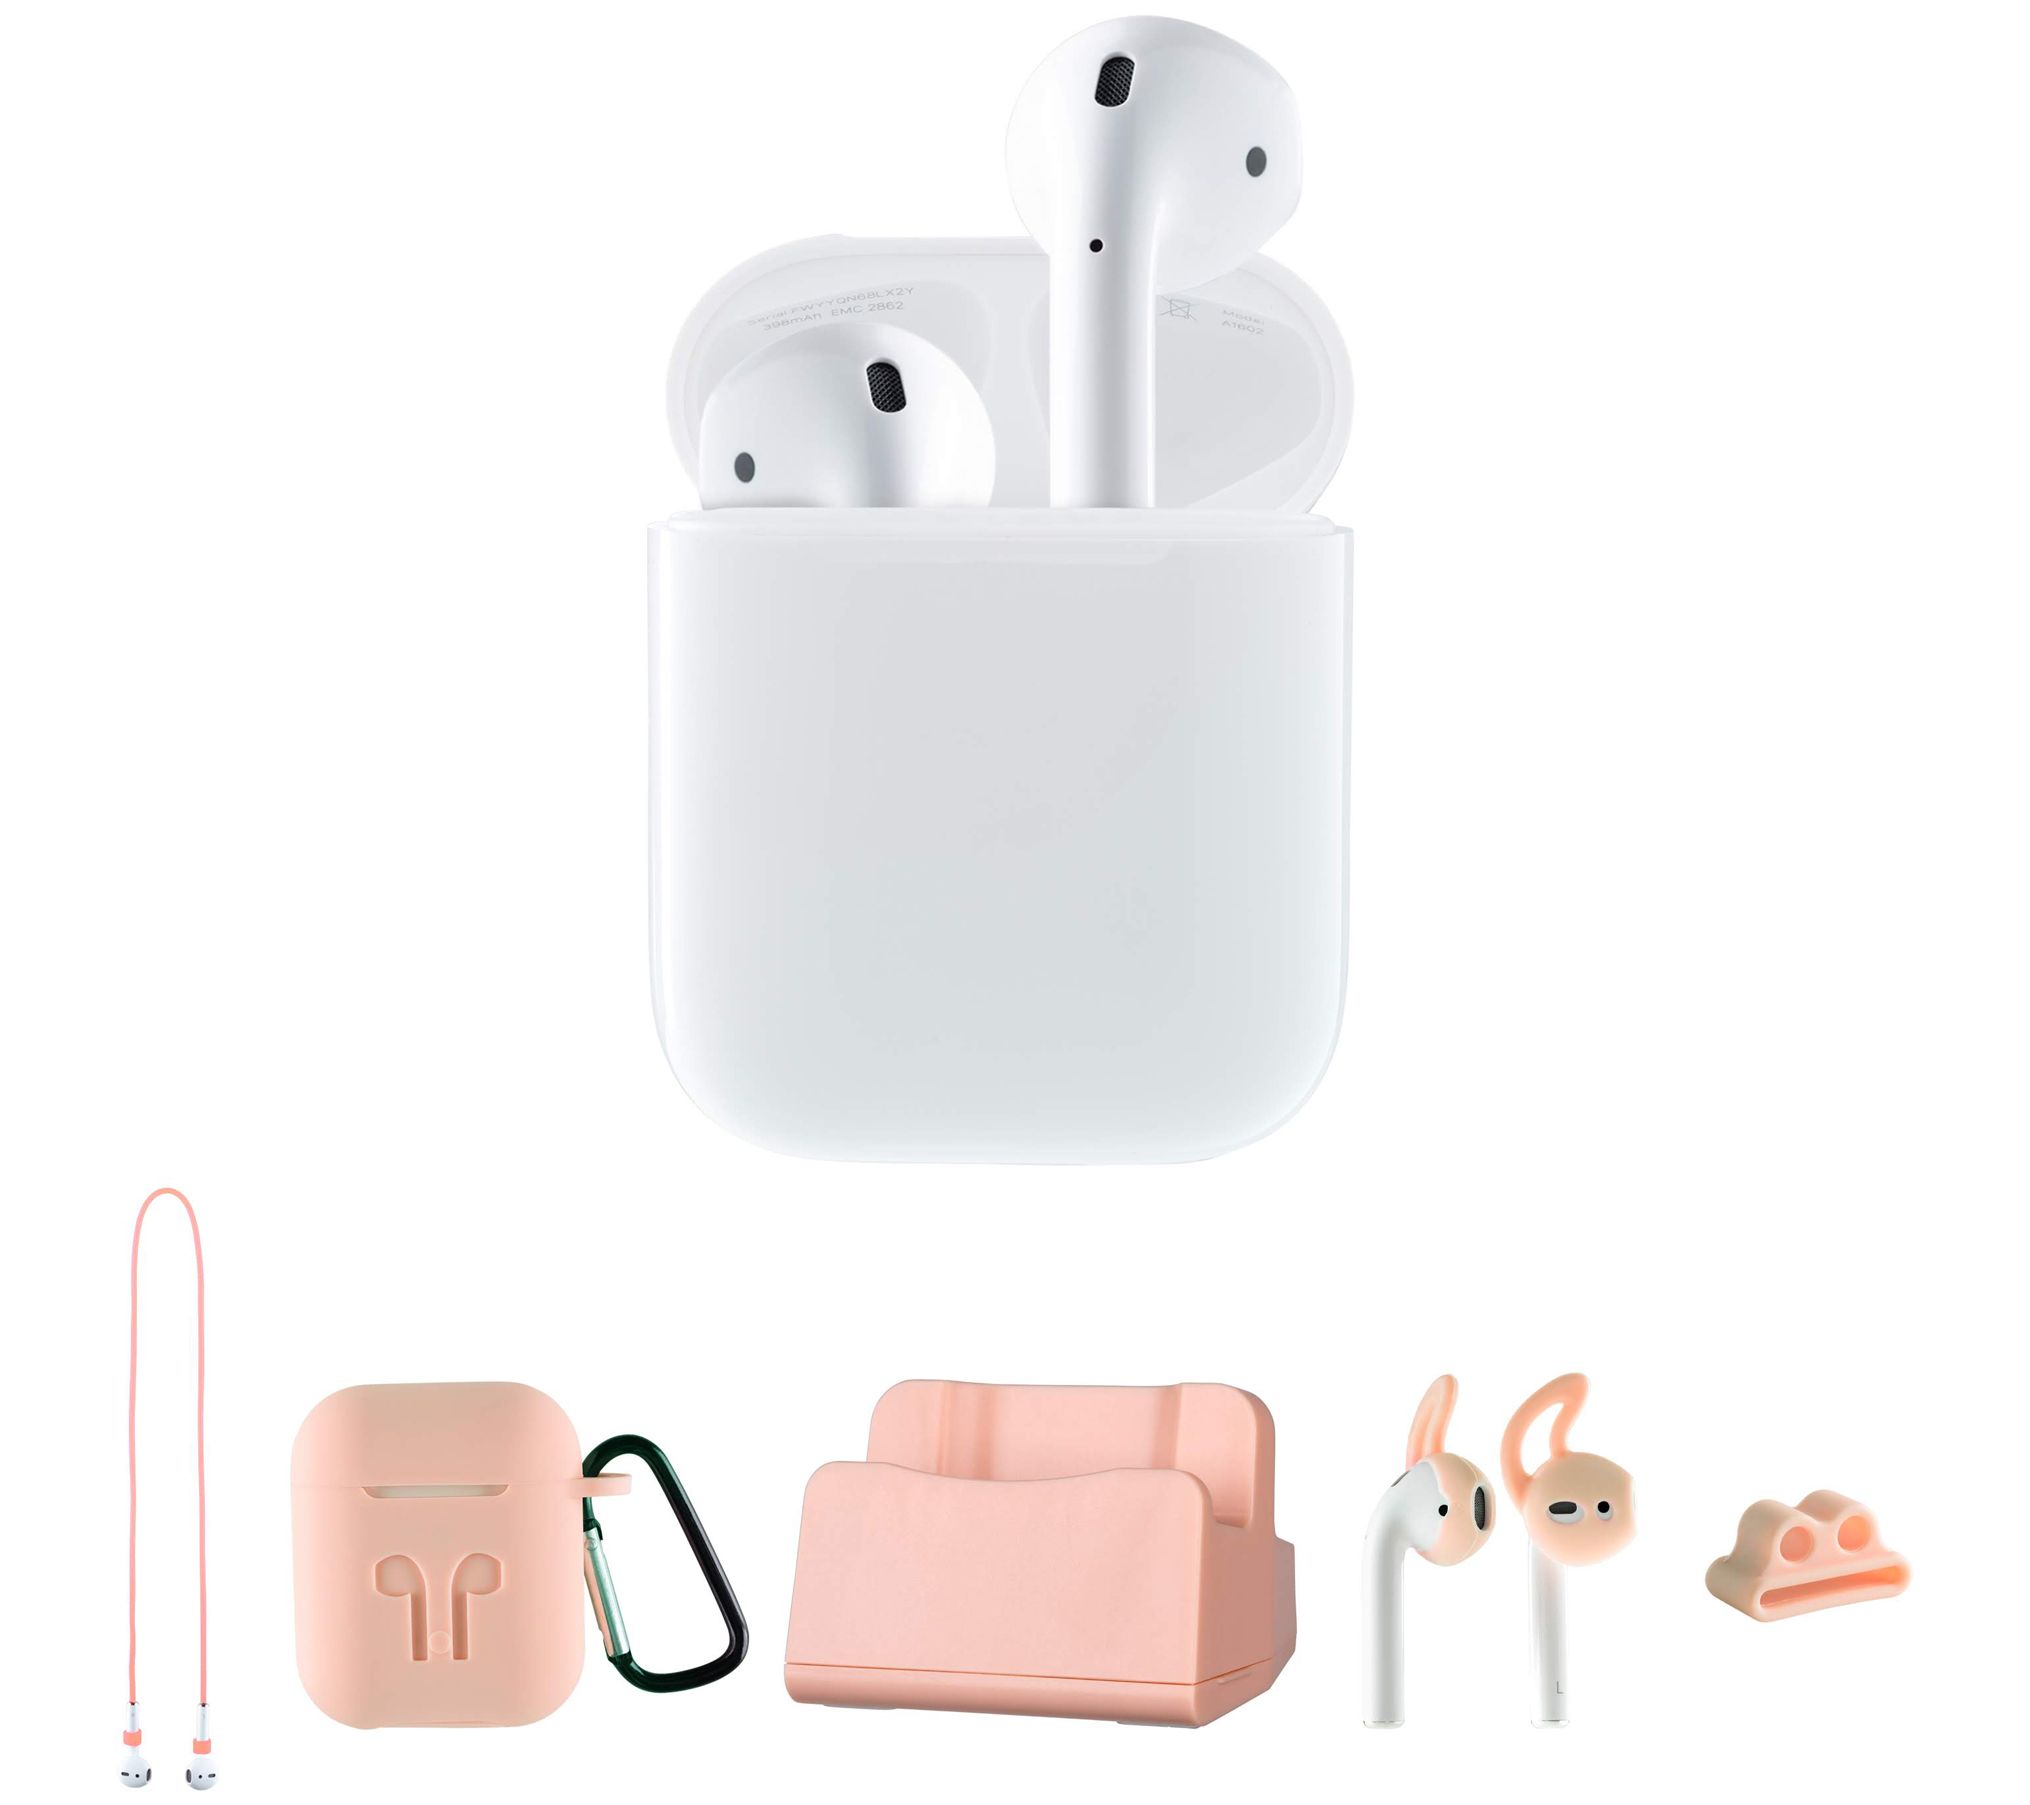 Apple Airpods (2nd generation) More magical than ever- Fonez